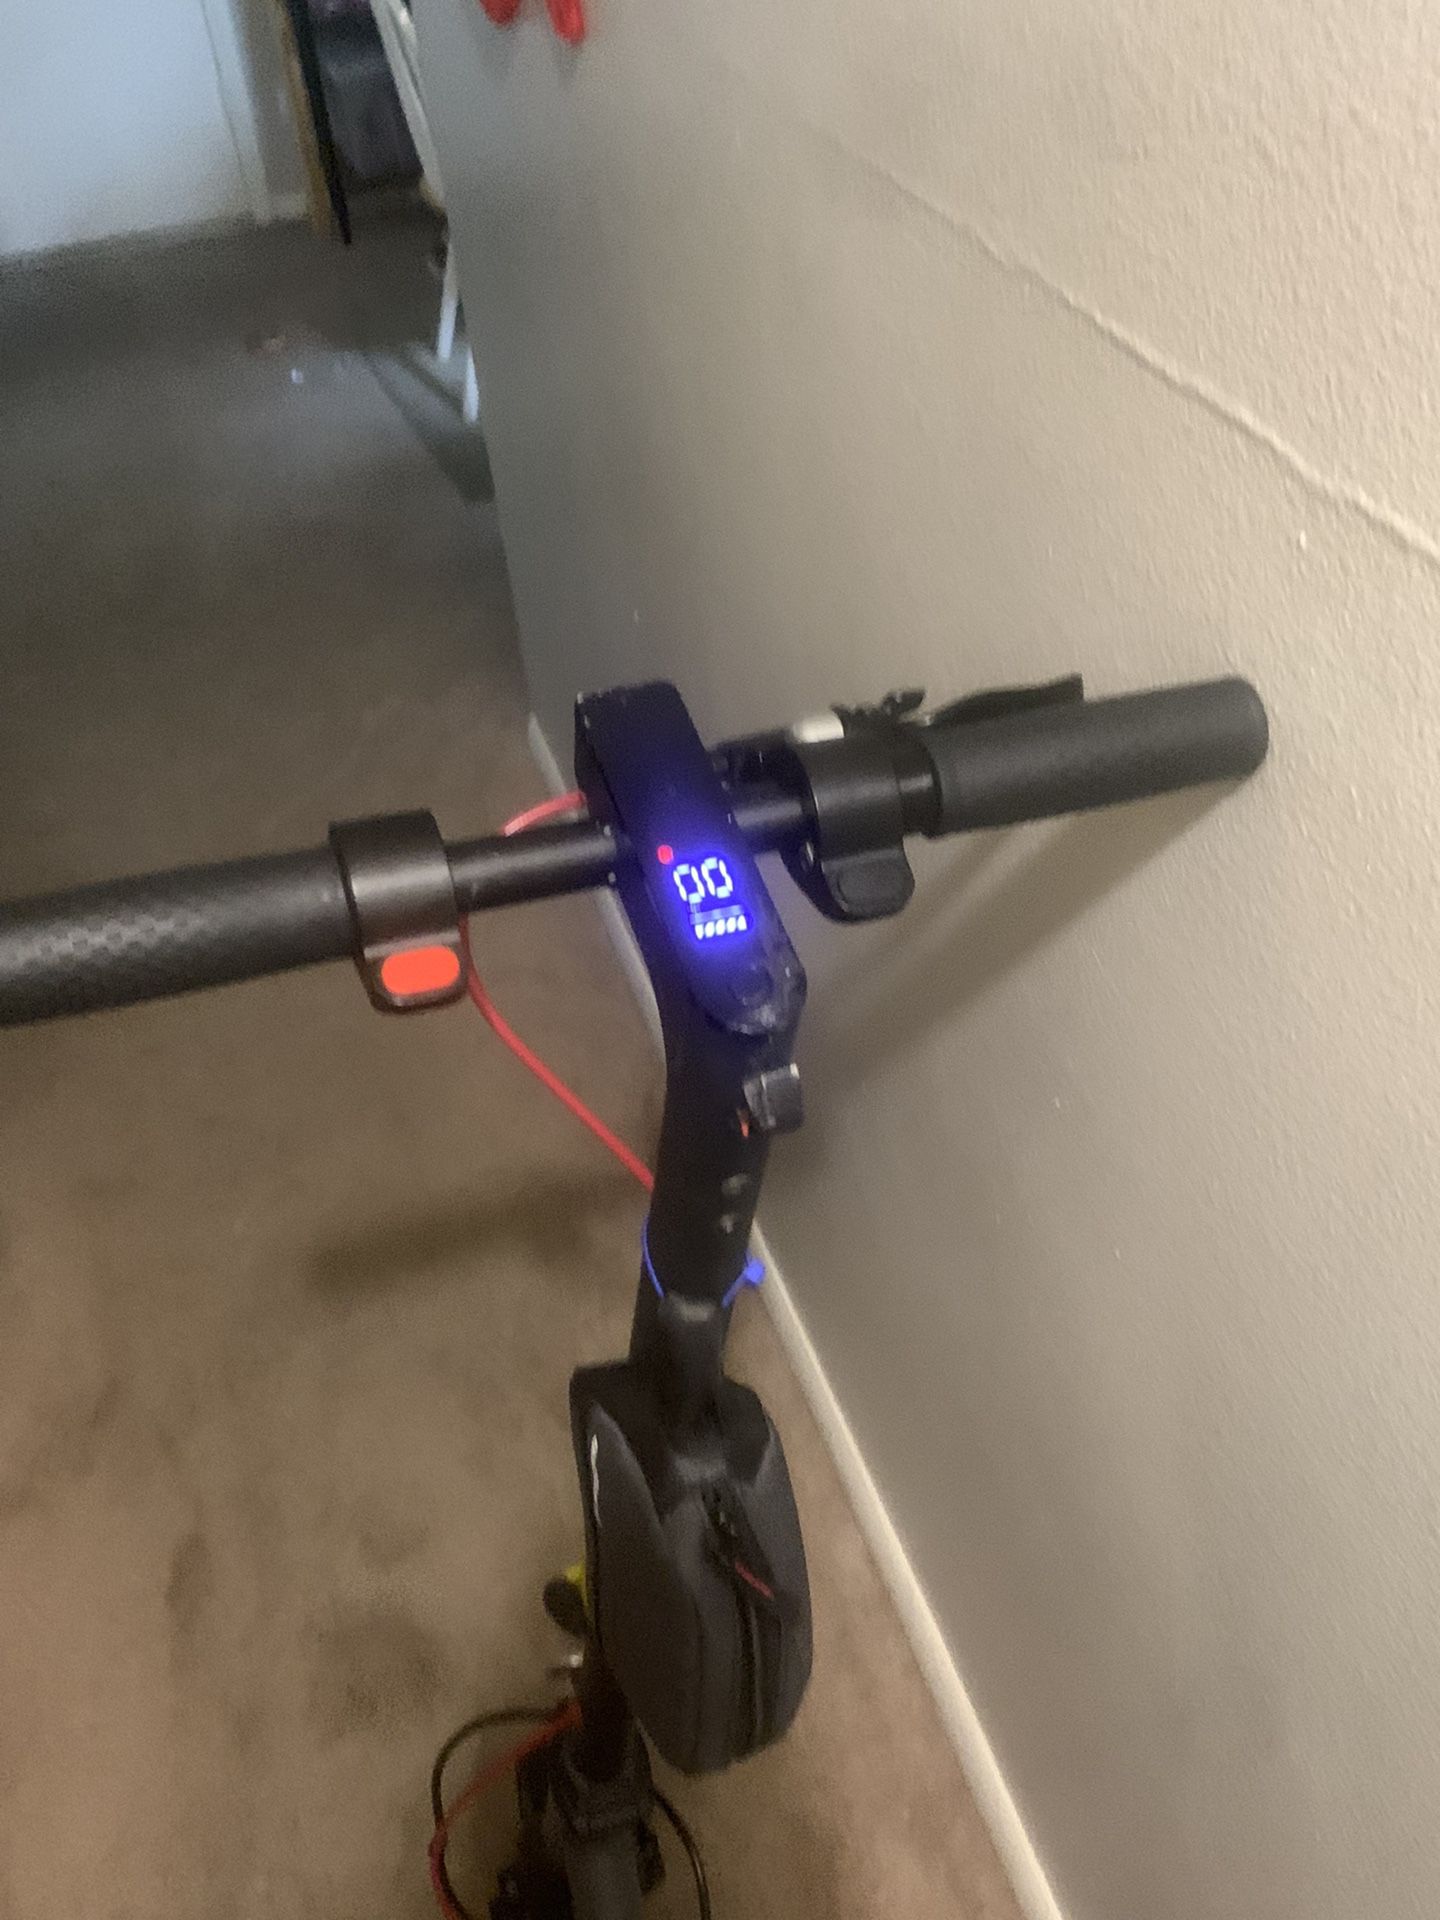 Hi-Boy S2 Electric Scooter 